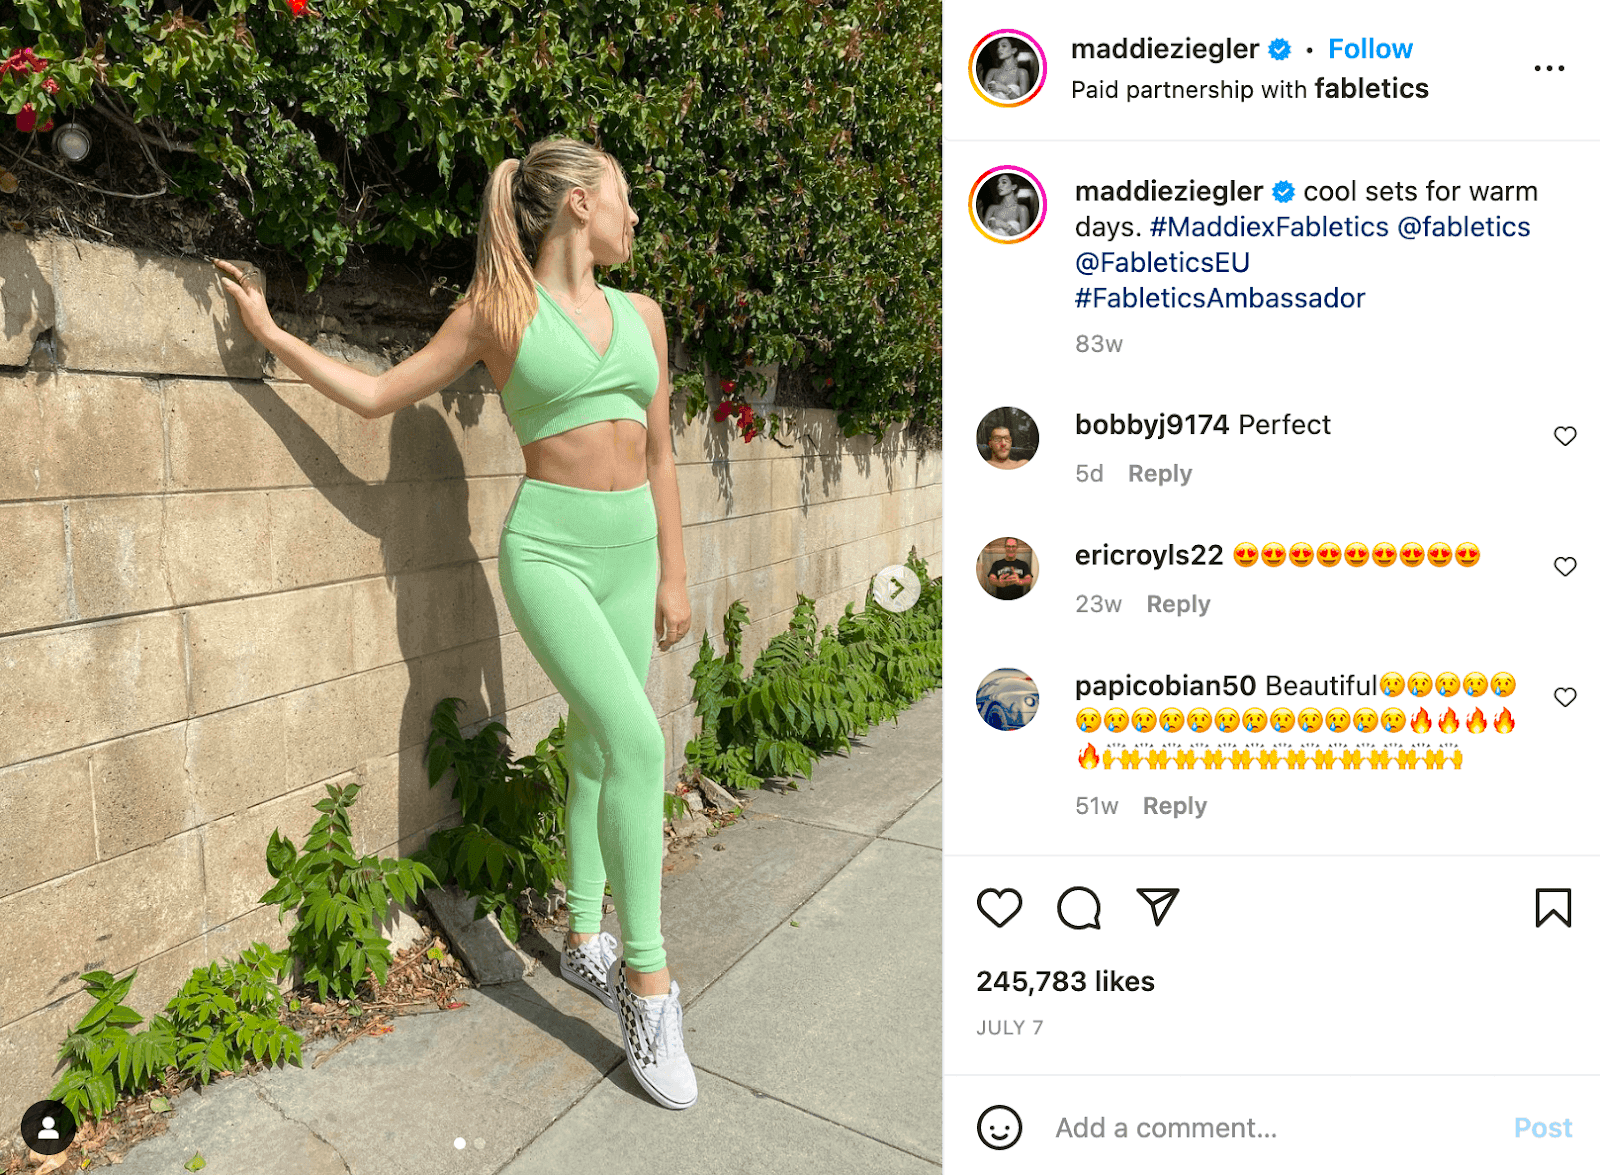 Fabletics athletic set being promoted by famous dancer Maddie Ziegler on her Instagram.